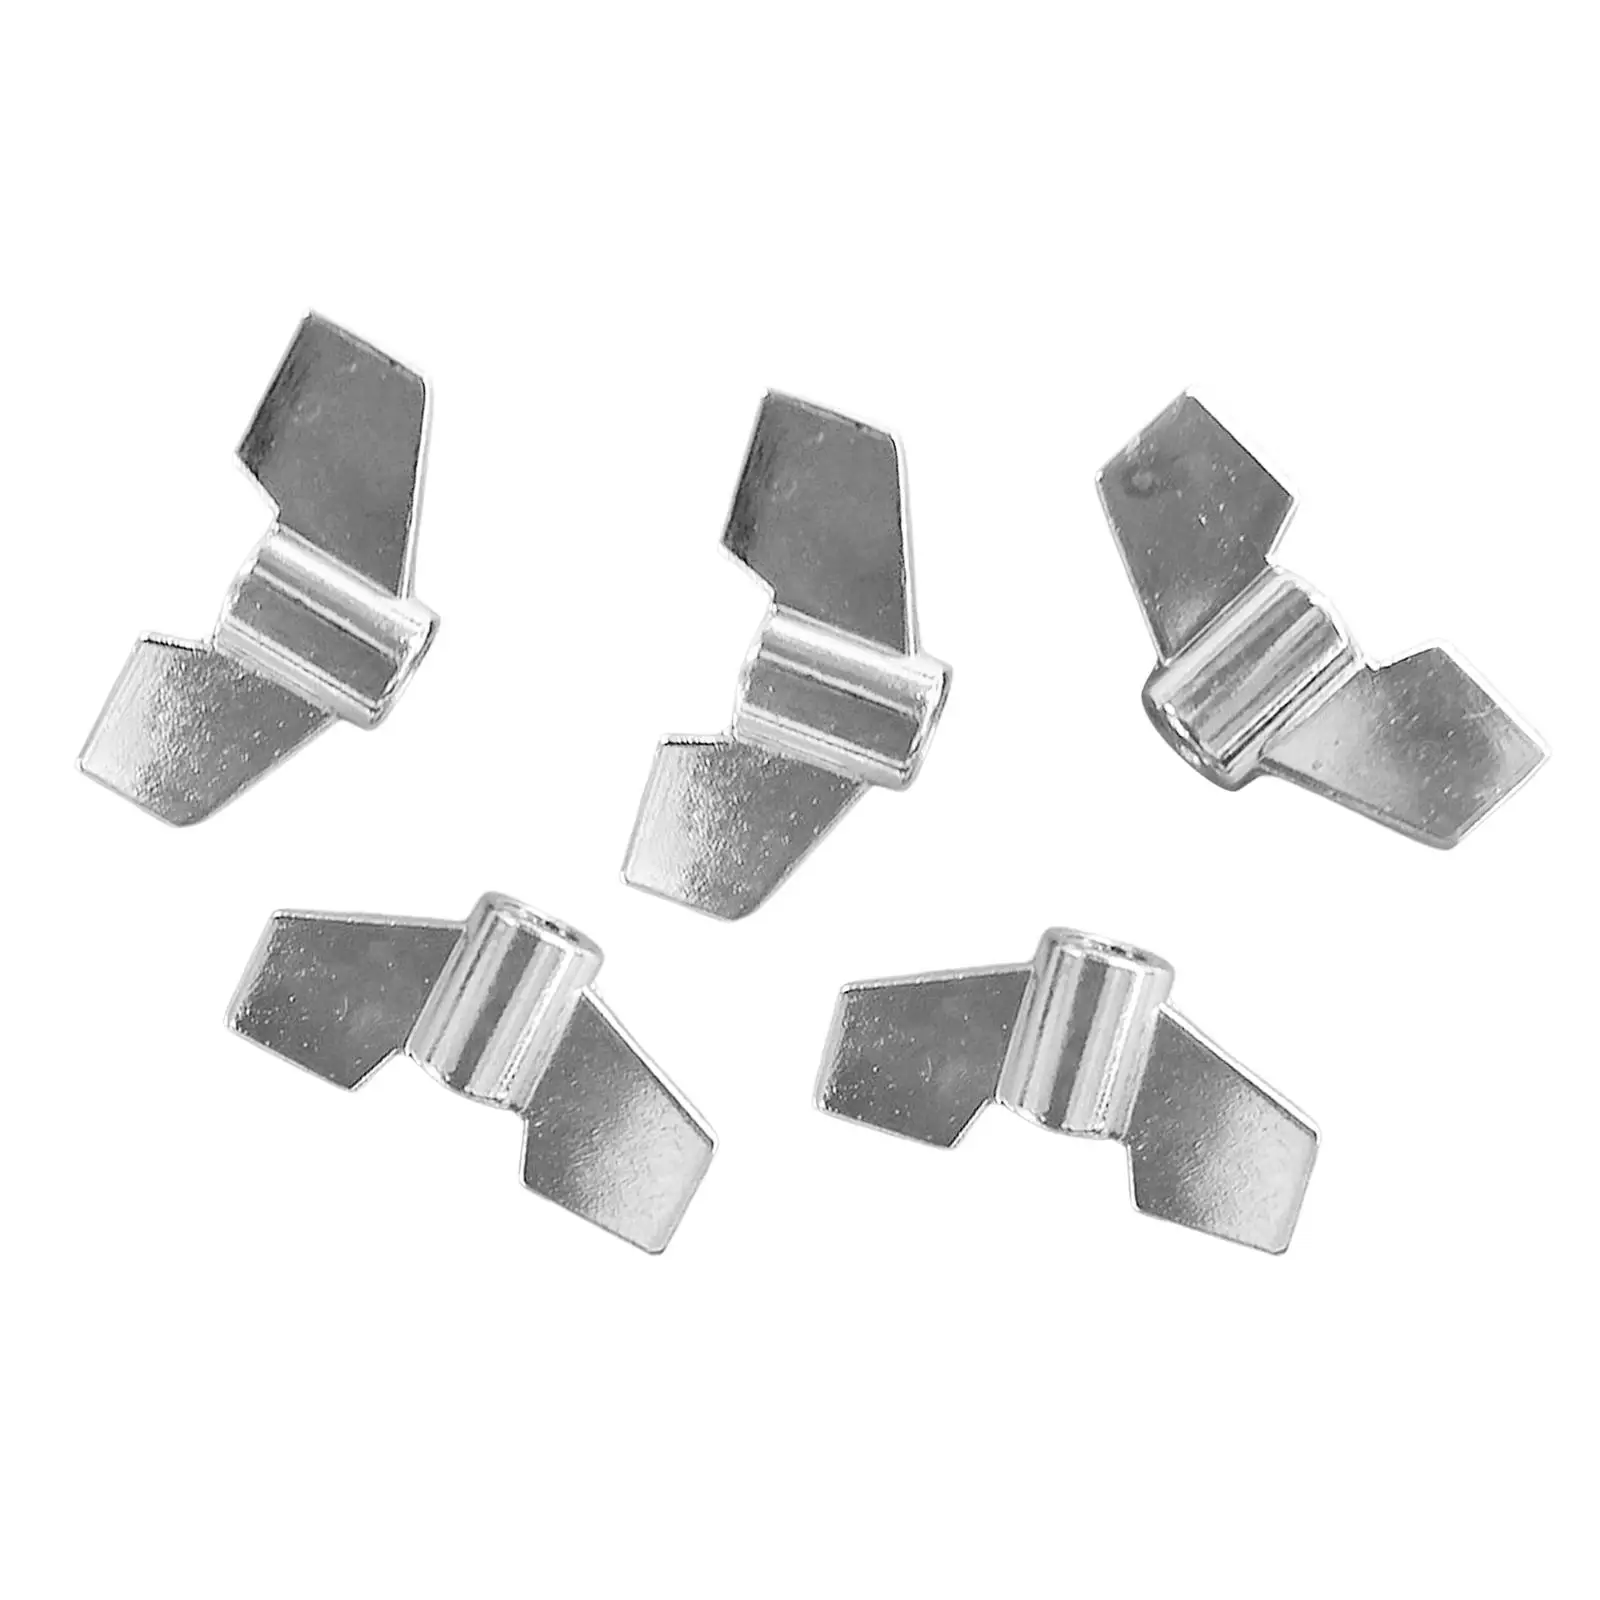 5Pcs Wing Nuts Musical Instrument Parts Cymbal Replacement Accessories Drum Wing Nuts Cymbal Wing Nuts for Cymbal Stackers